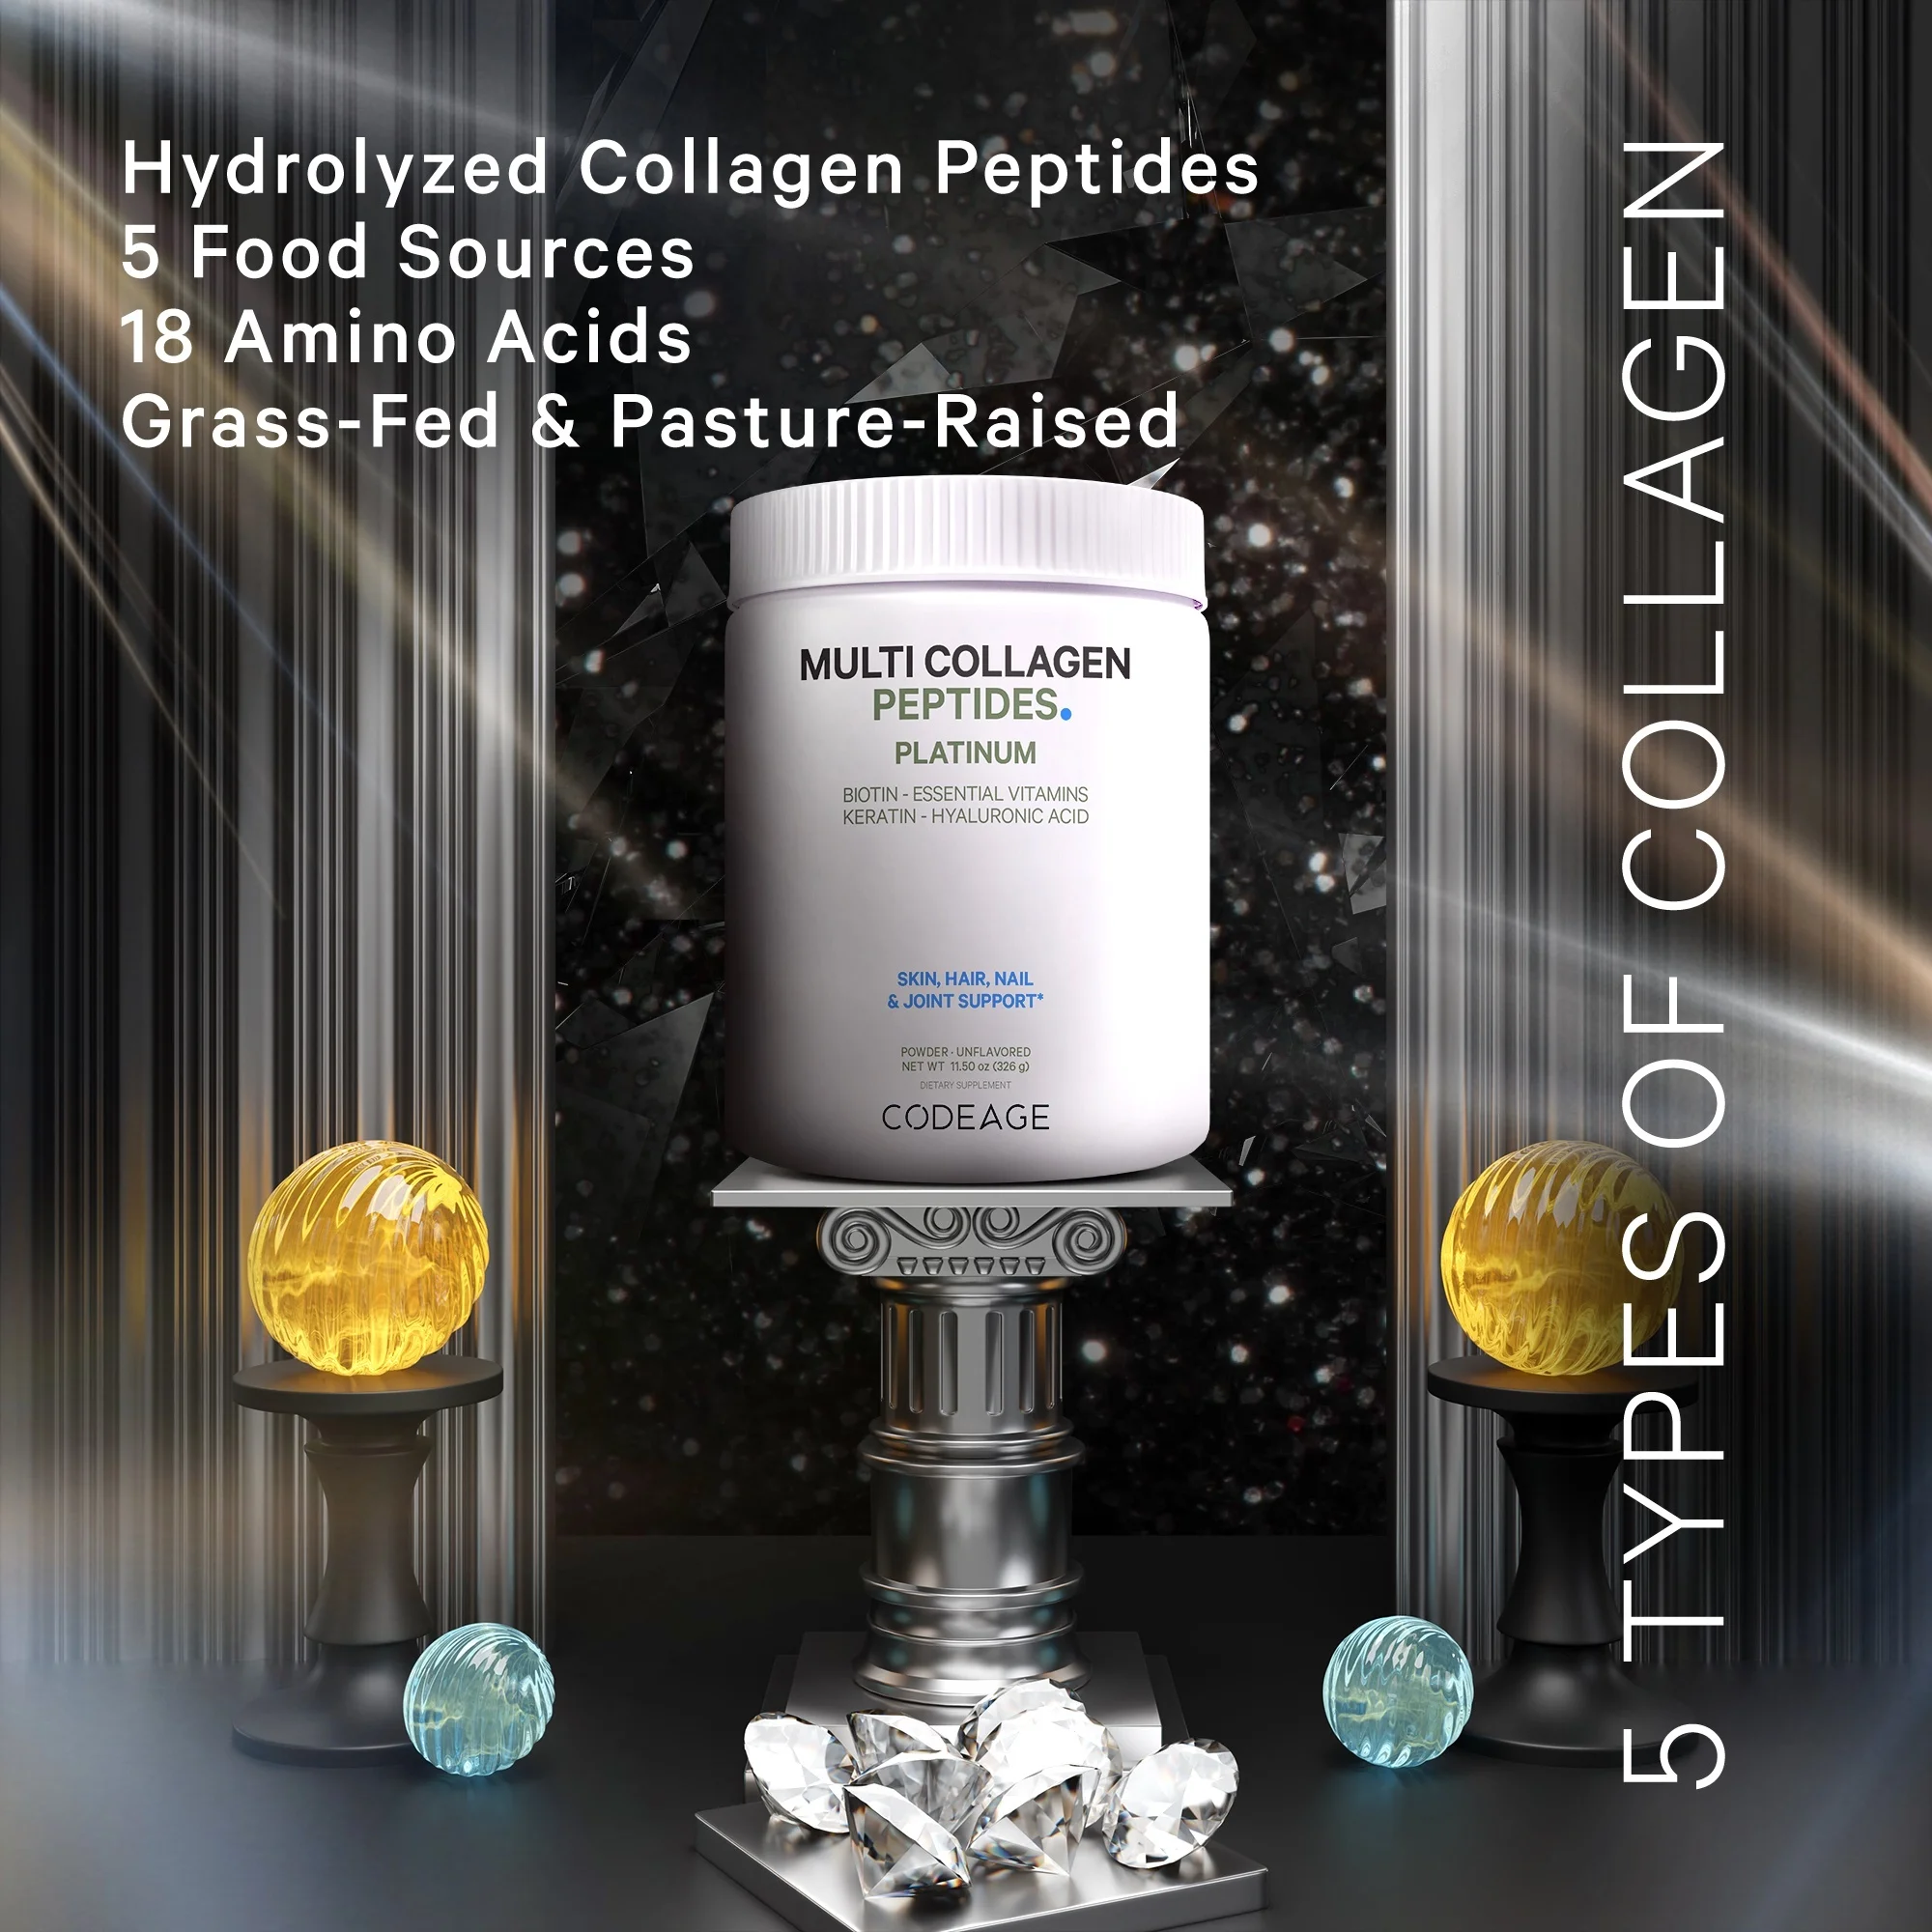 Codeage Platinum Multi Collagen Peptides Powder: The Ultimate Solution for Beautiful Hair, Skin & Nails